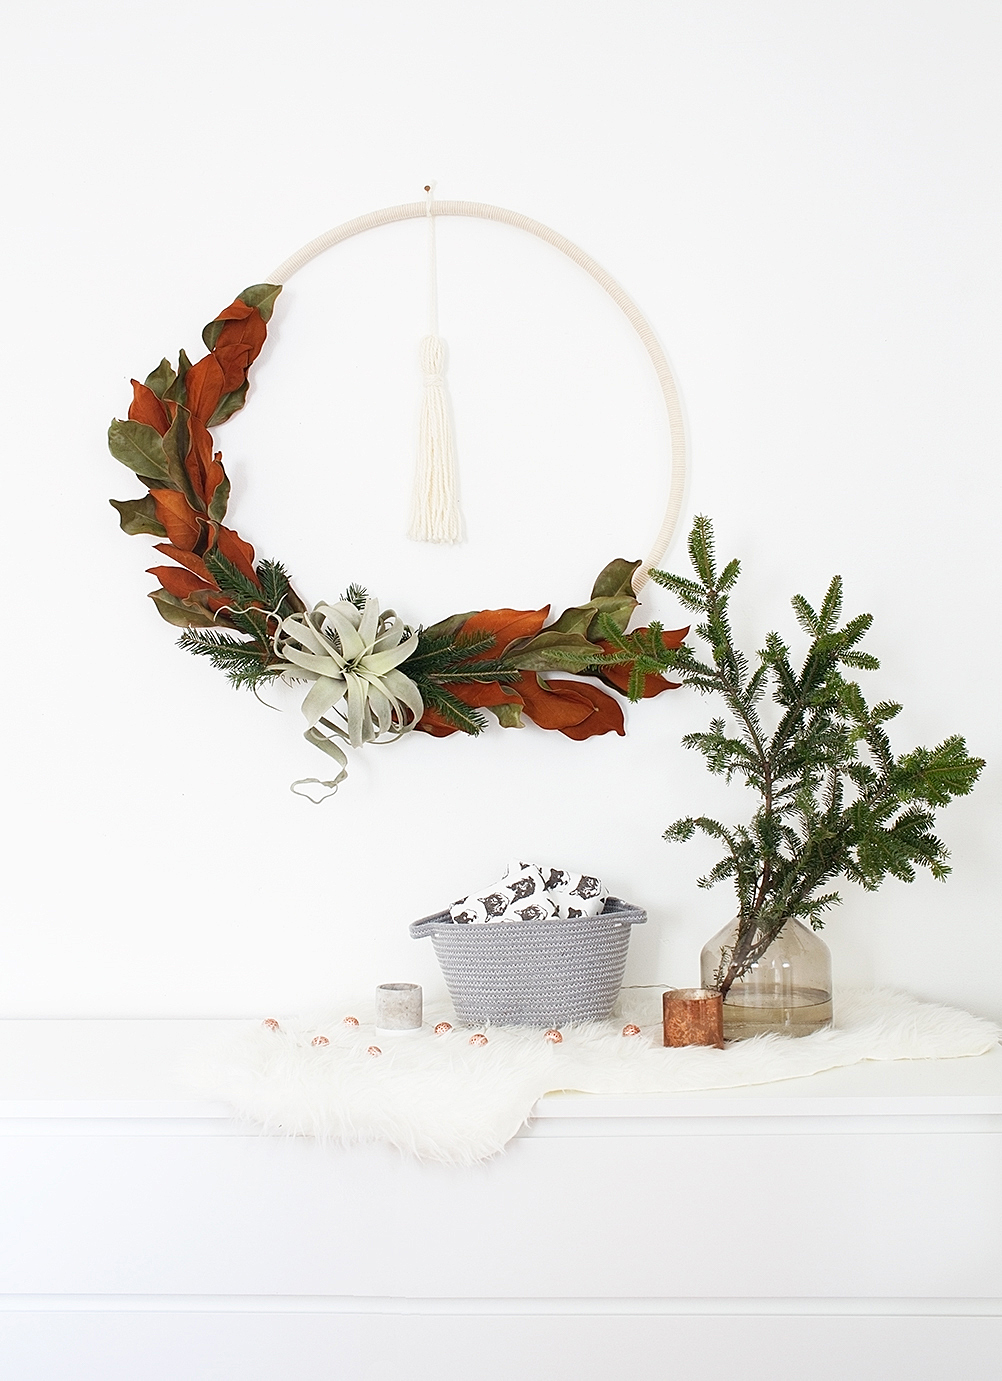 DIY Boho Winter Wreath made from a hula hoop - such a beautiful touch for your modern Scandibo holiday decor!